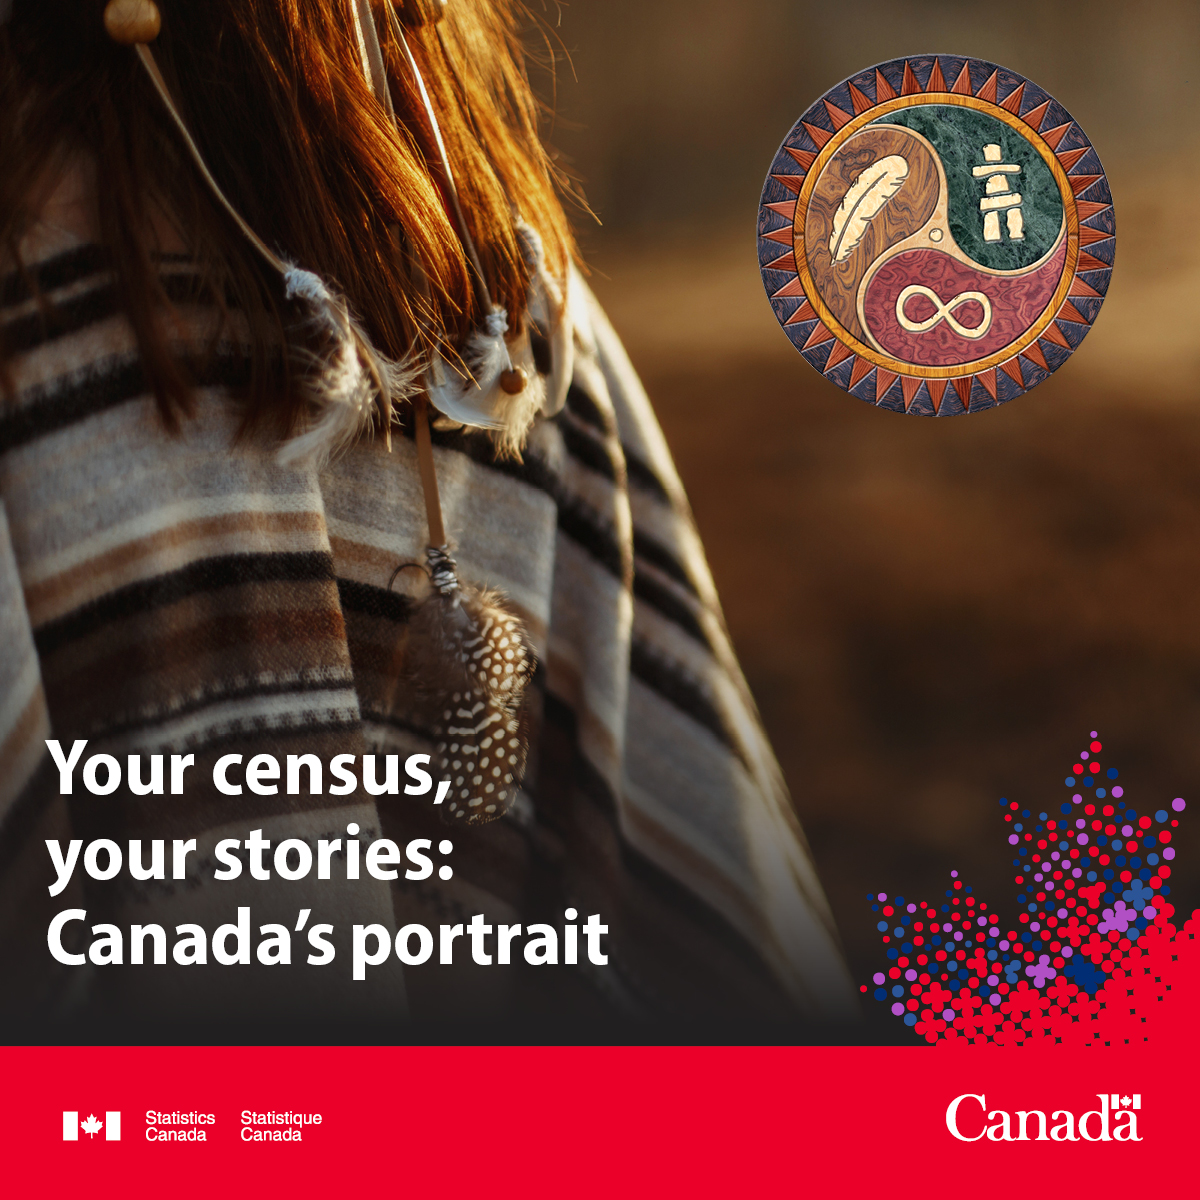 Post 6 image - Your census, Your stories: Canada's portrait